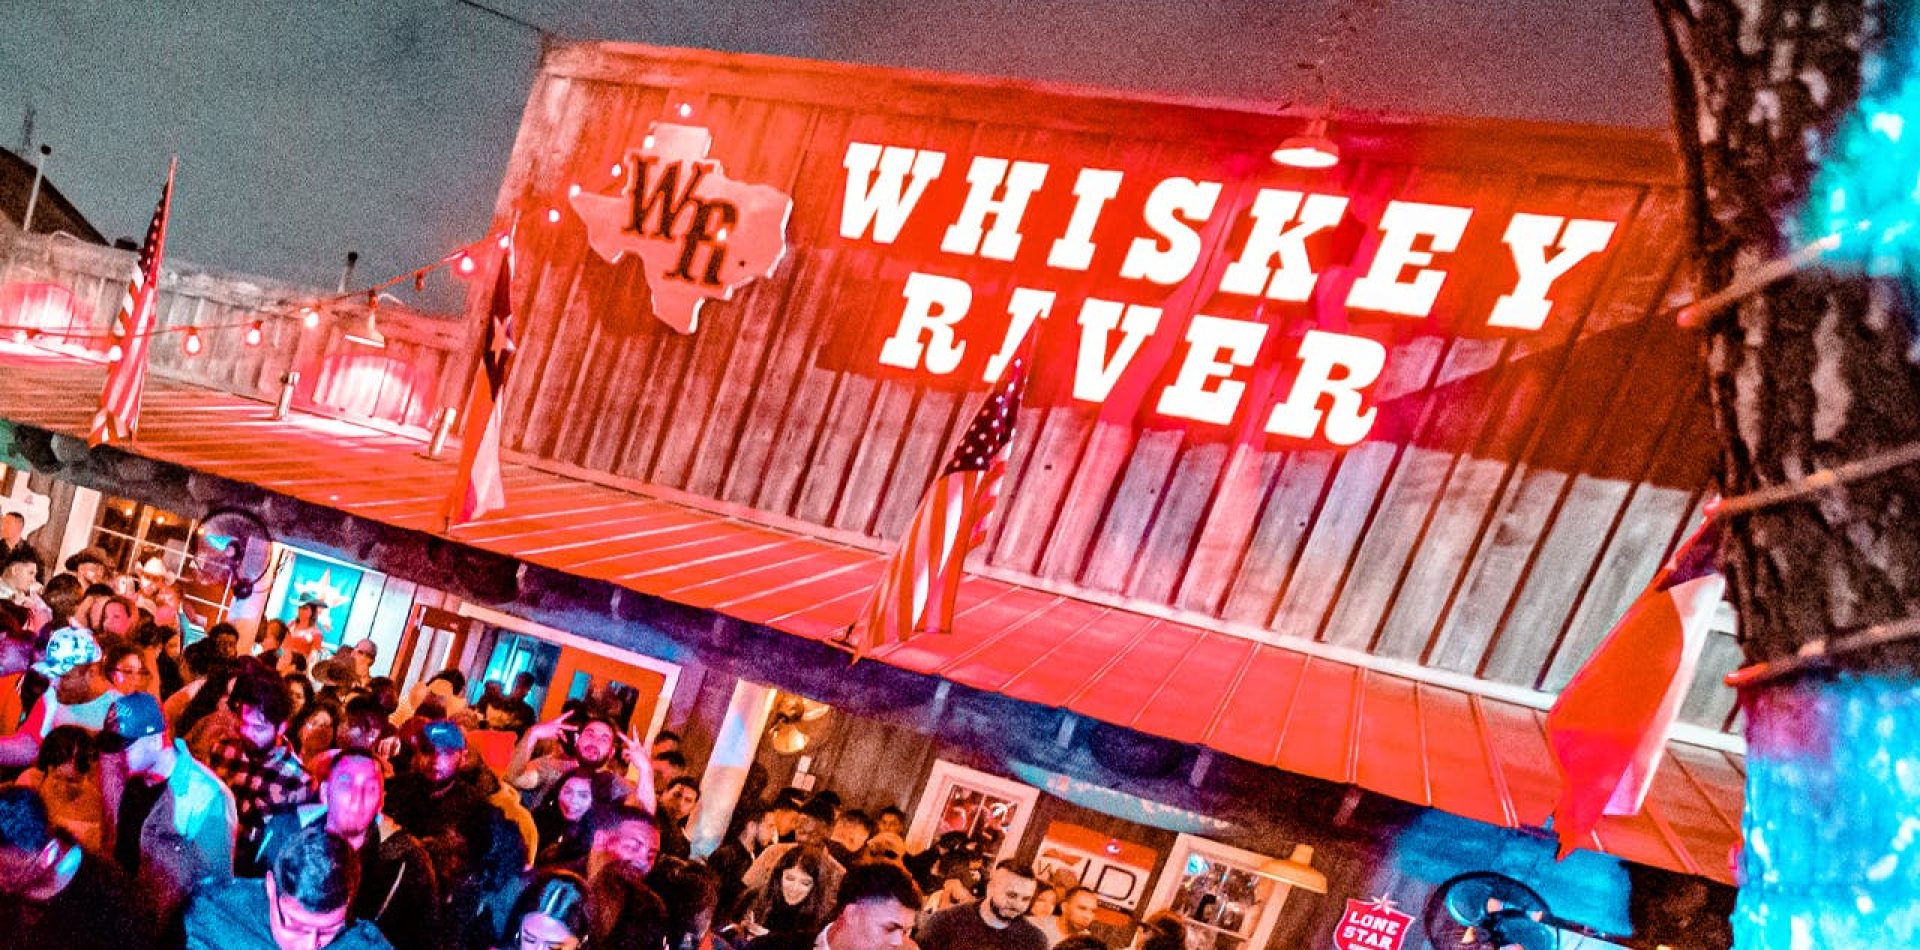 Whiskey River North bar in houston texas